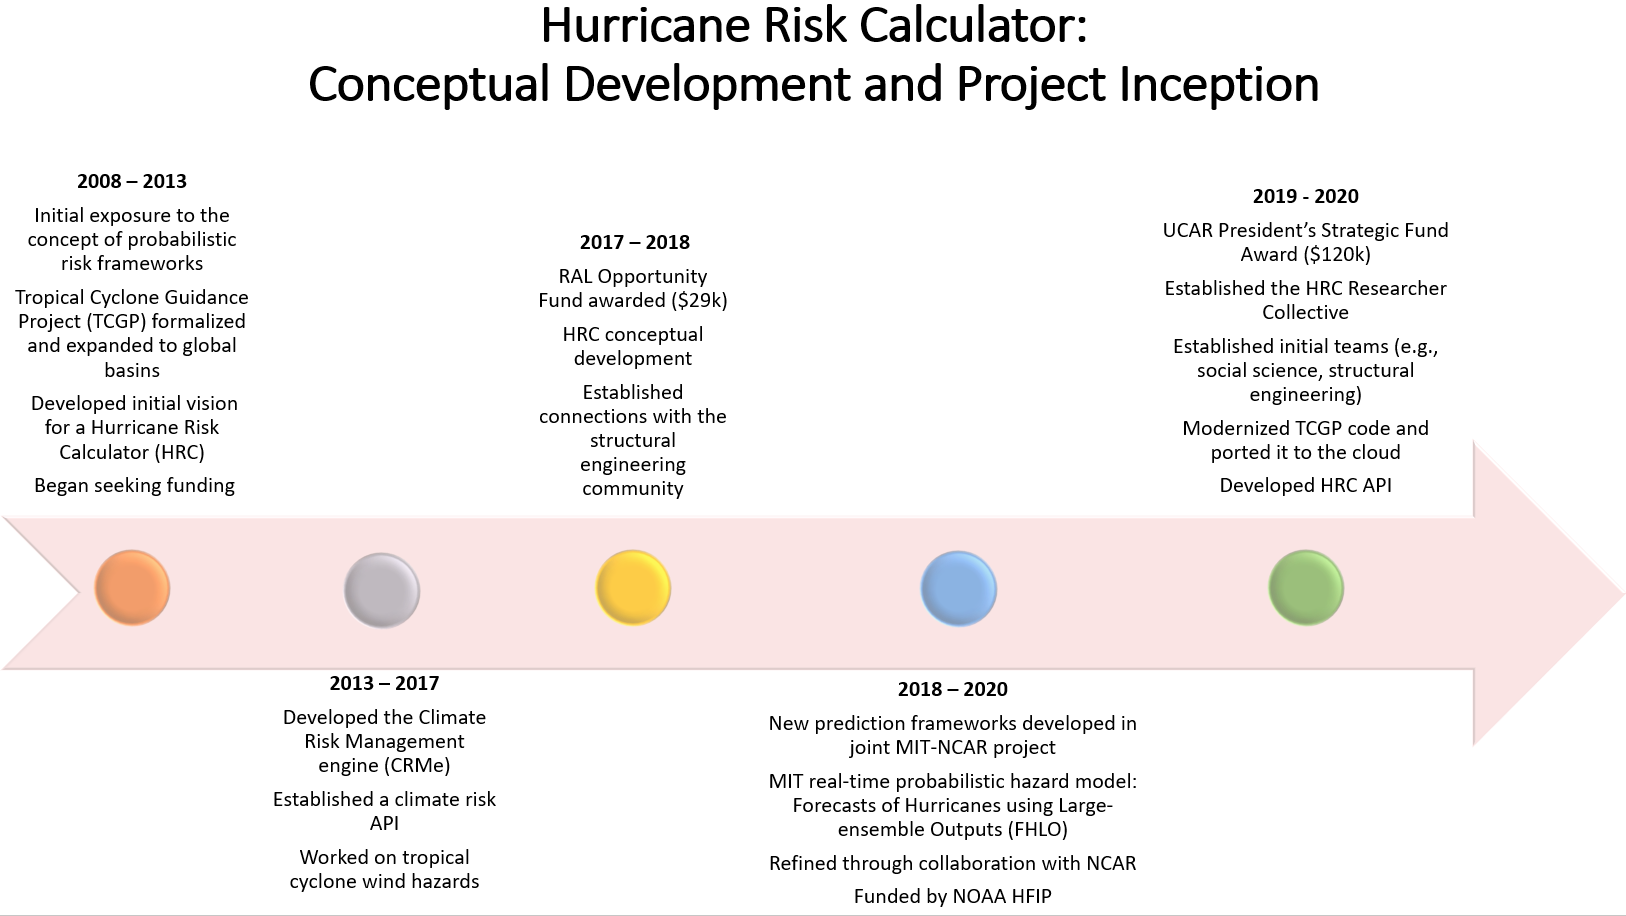 Graphic showing the inception and history of the Hurricane Risk Calculator project.